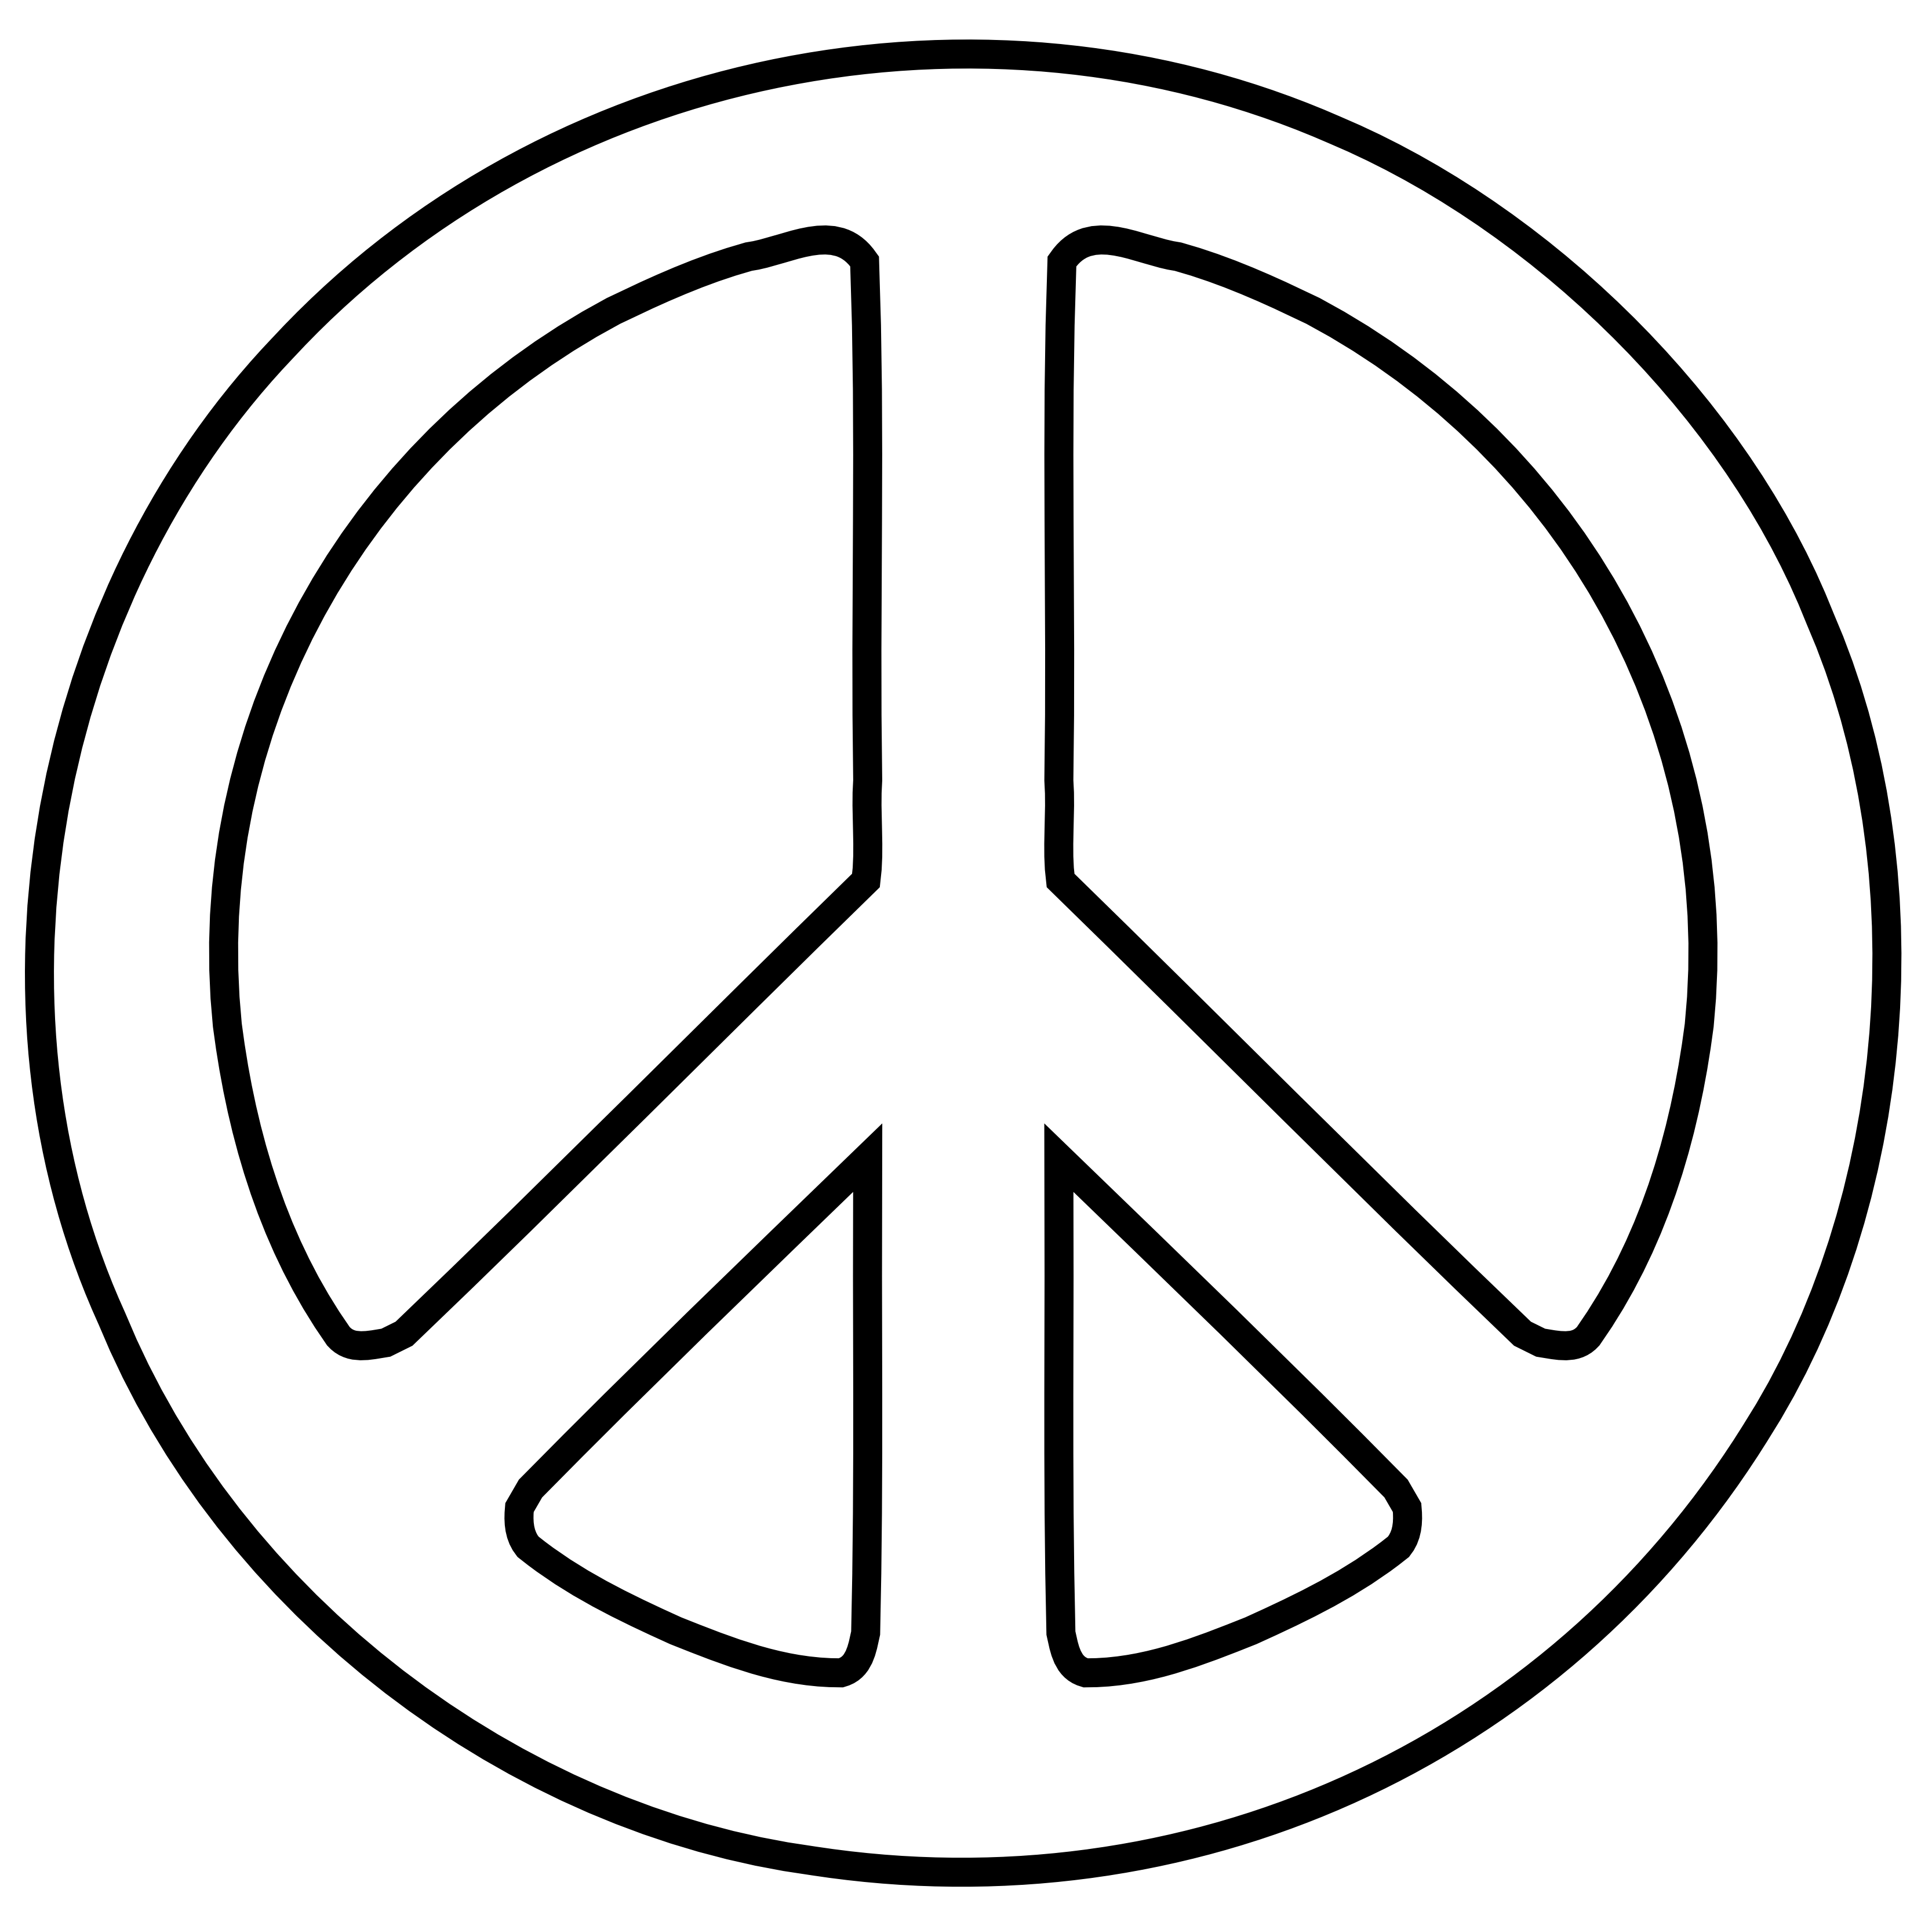  collection of black. Hands clipart peace